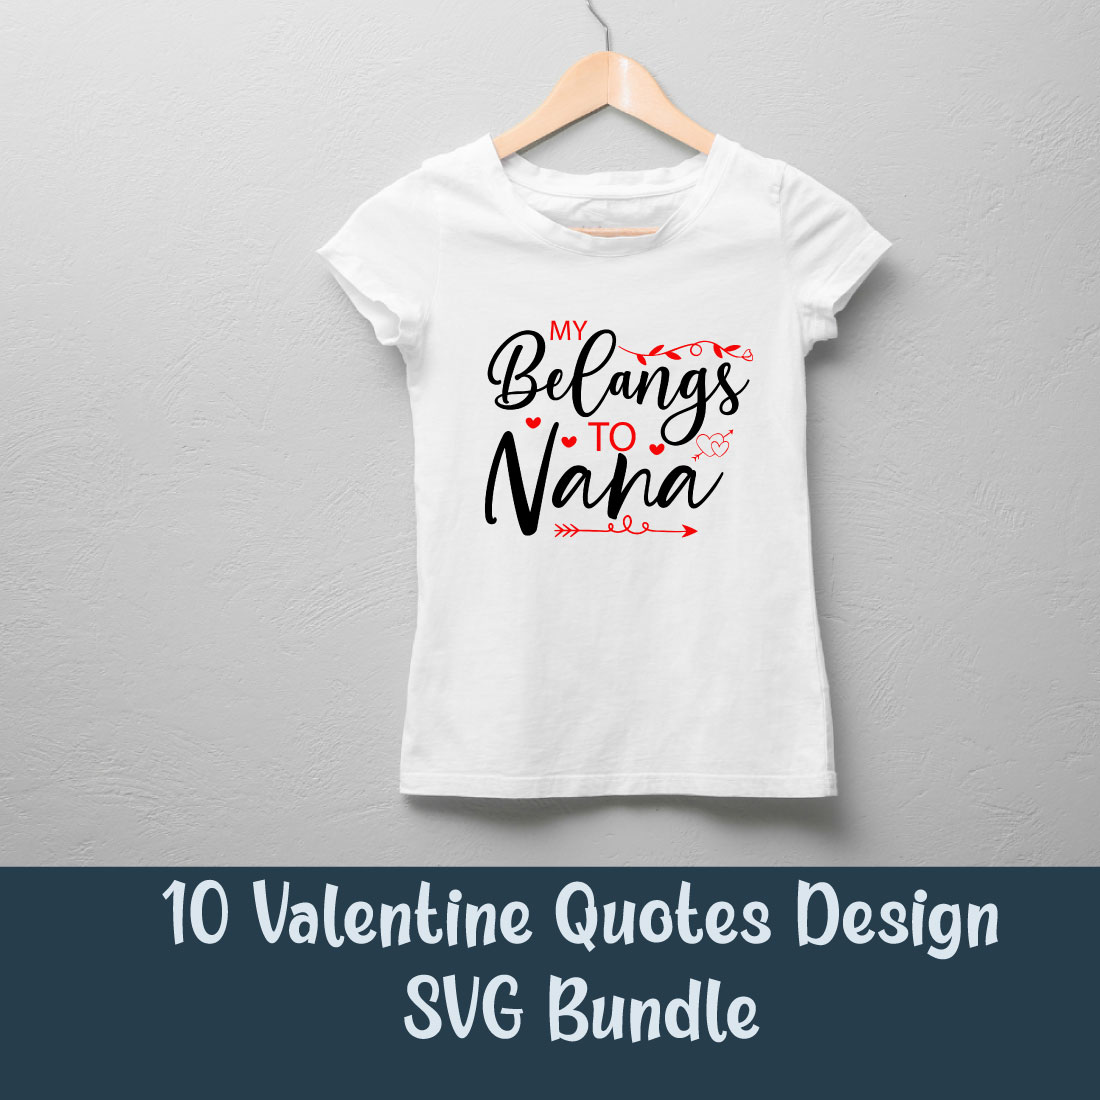 10 Typography Valentine Quotes SVG Bundle cover image.